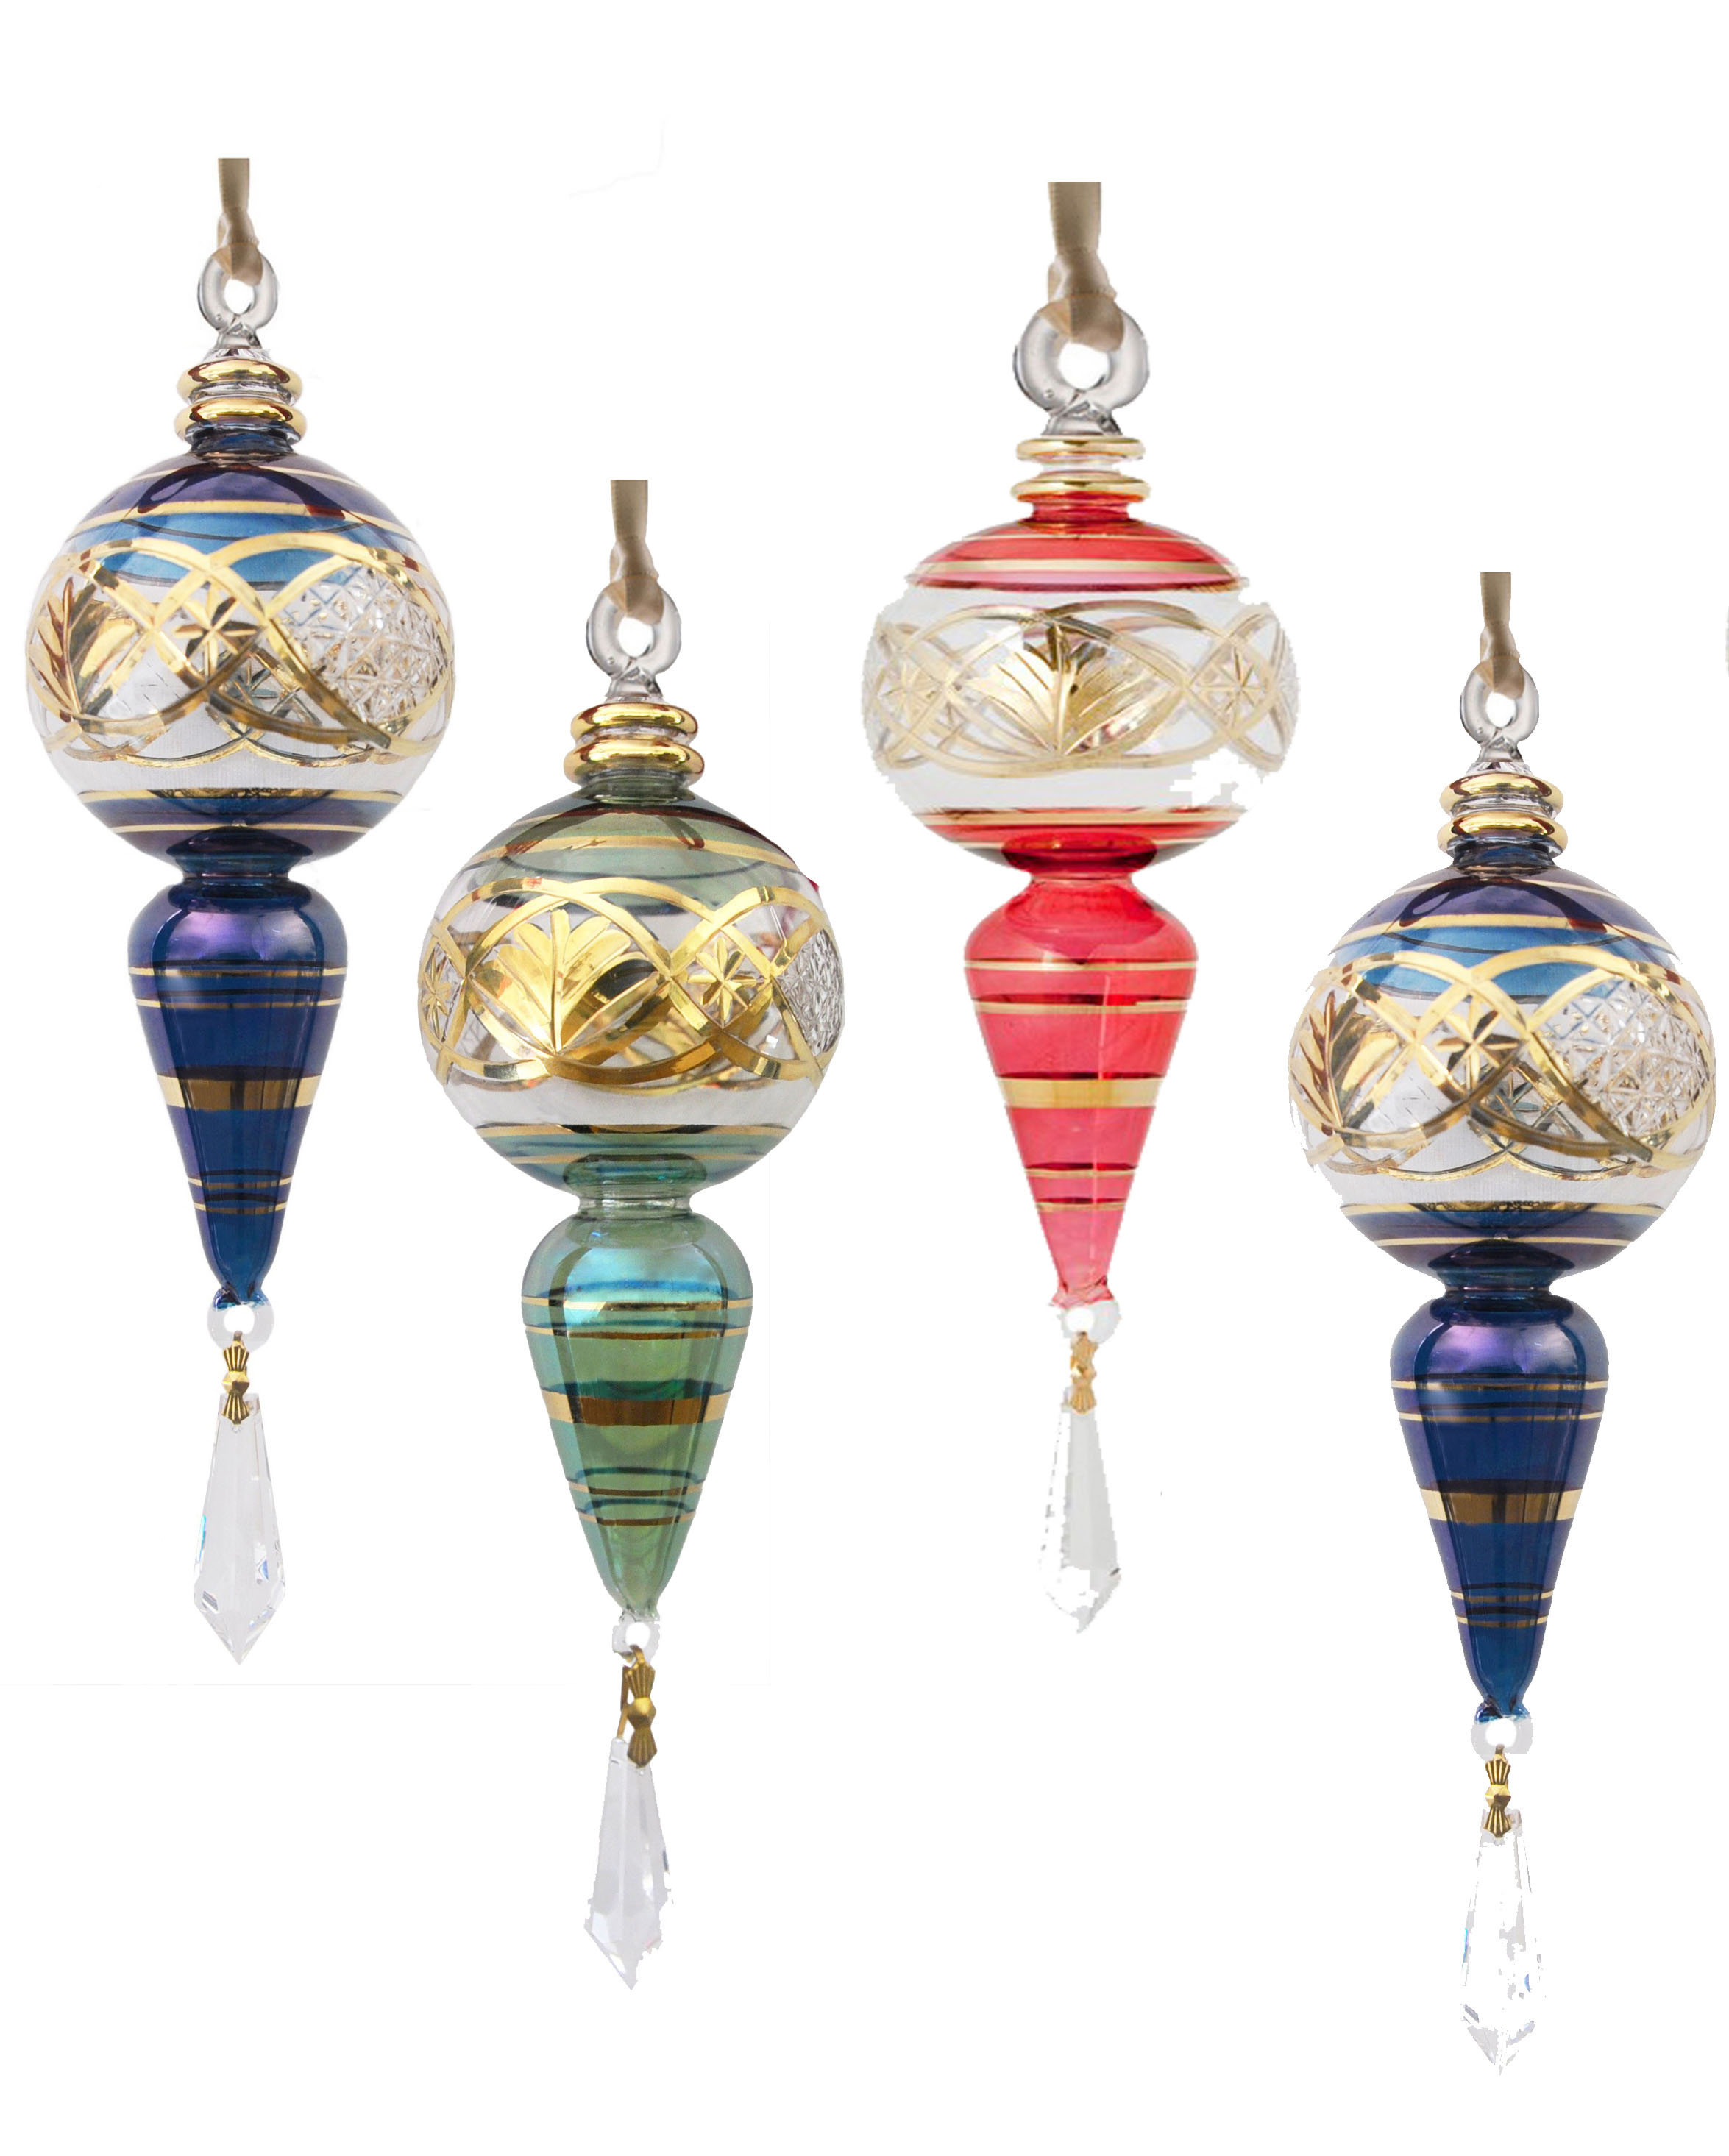 4 Hand Blown Glass Ornaments with crystal drop